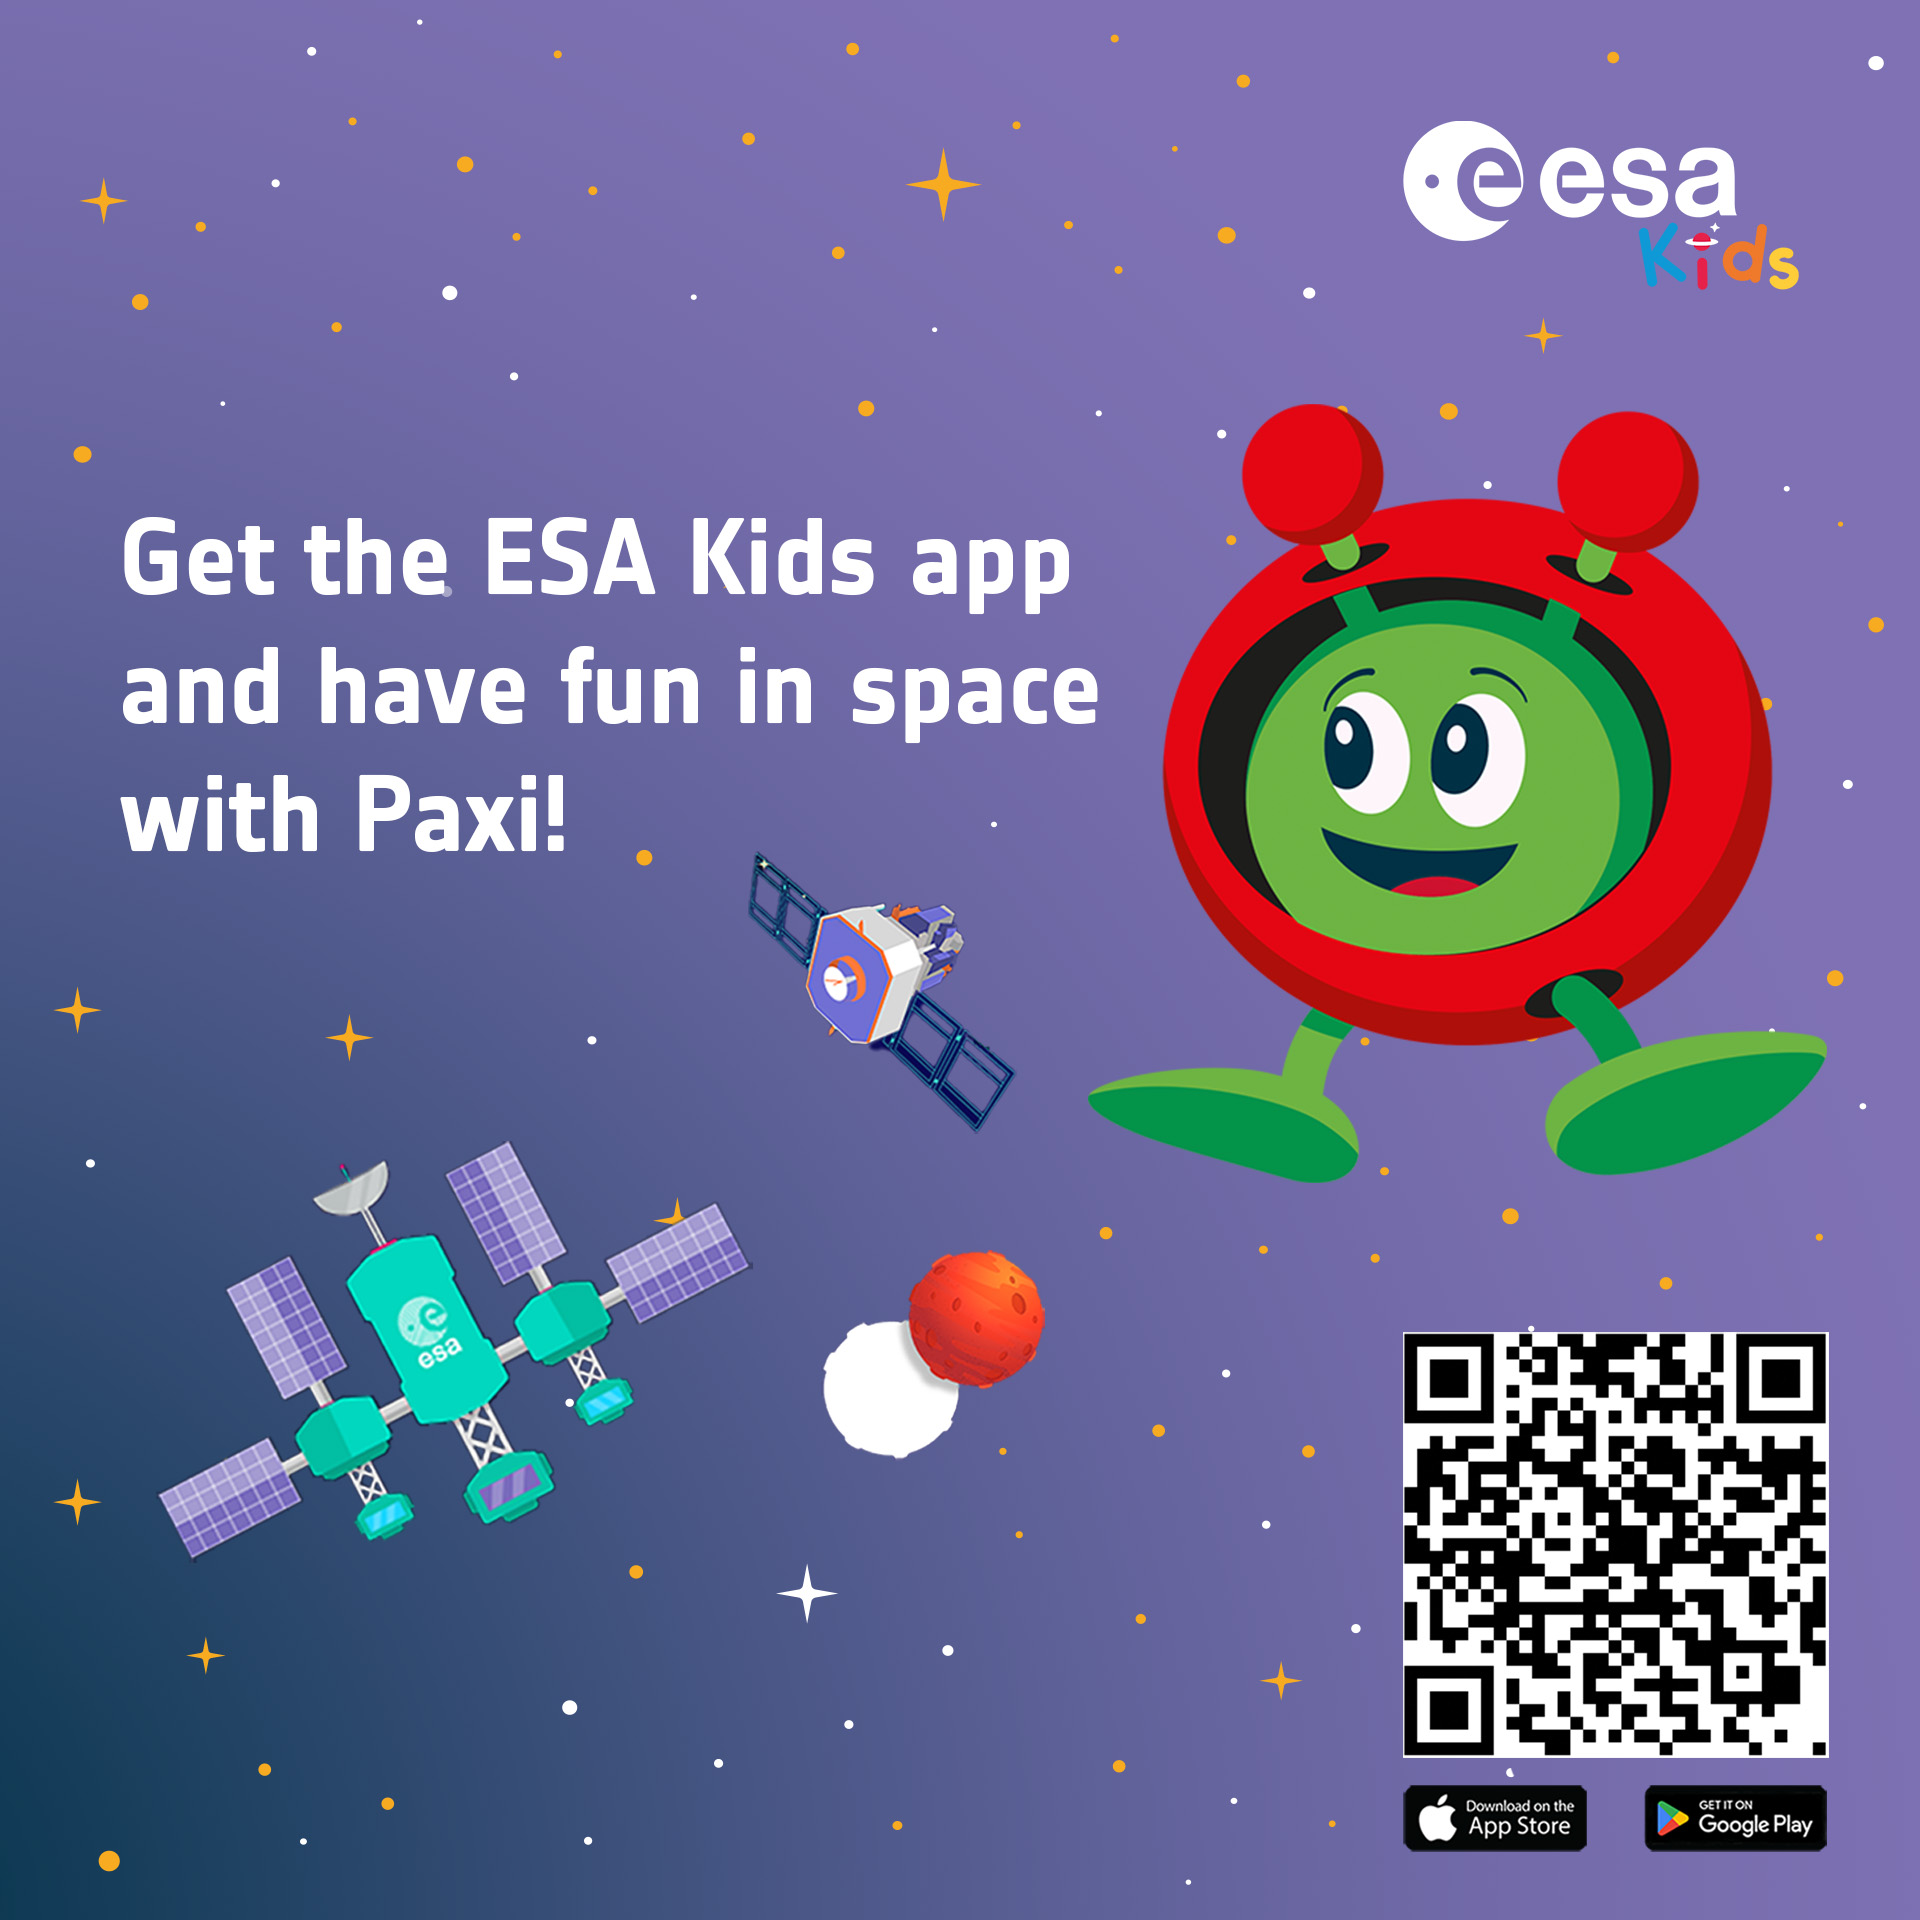 ESA - Space for Kids - Children of the world join Europe's mission